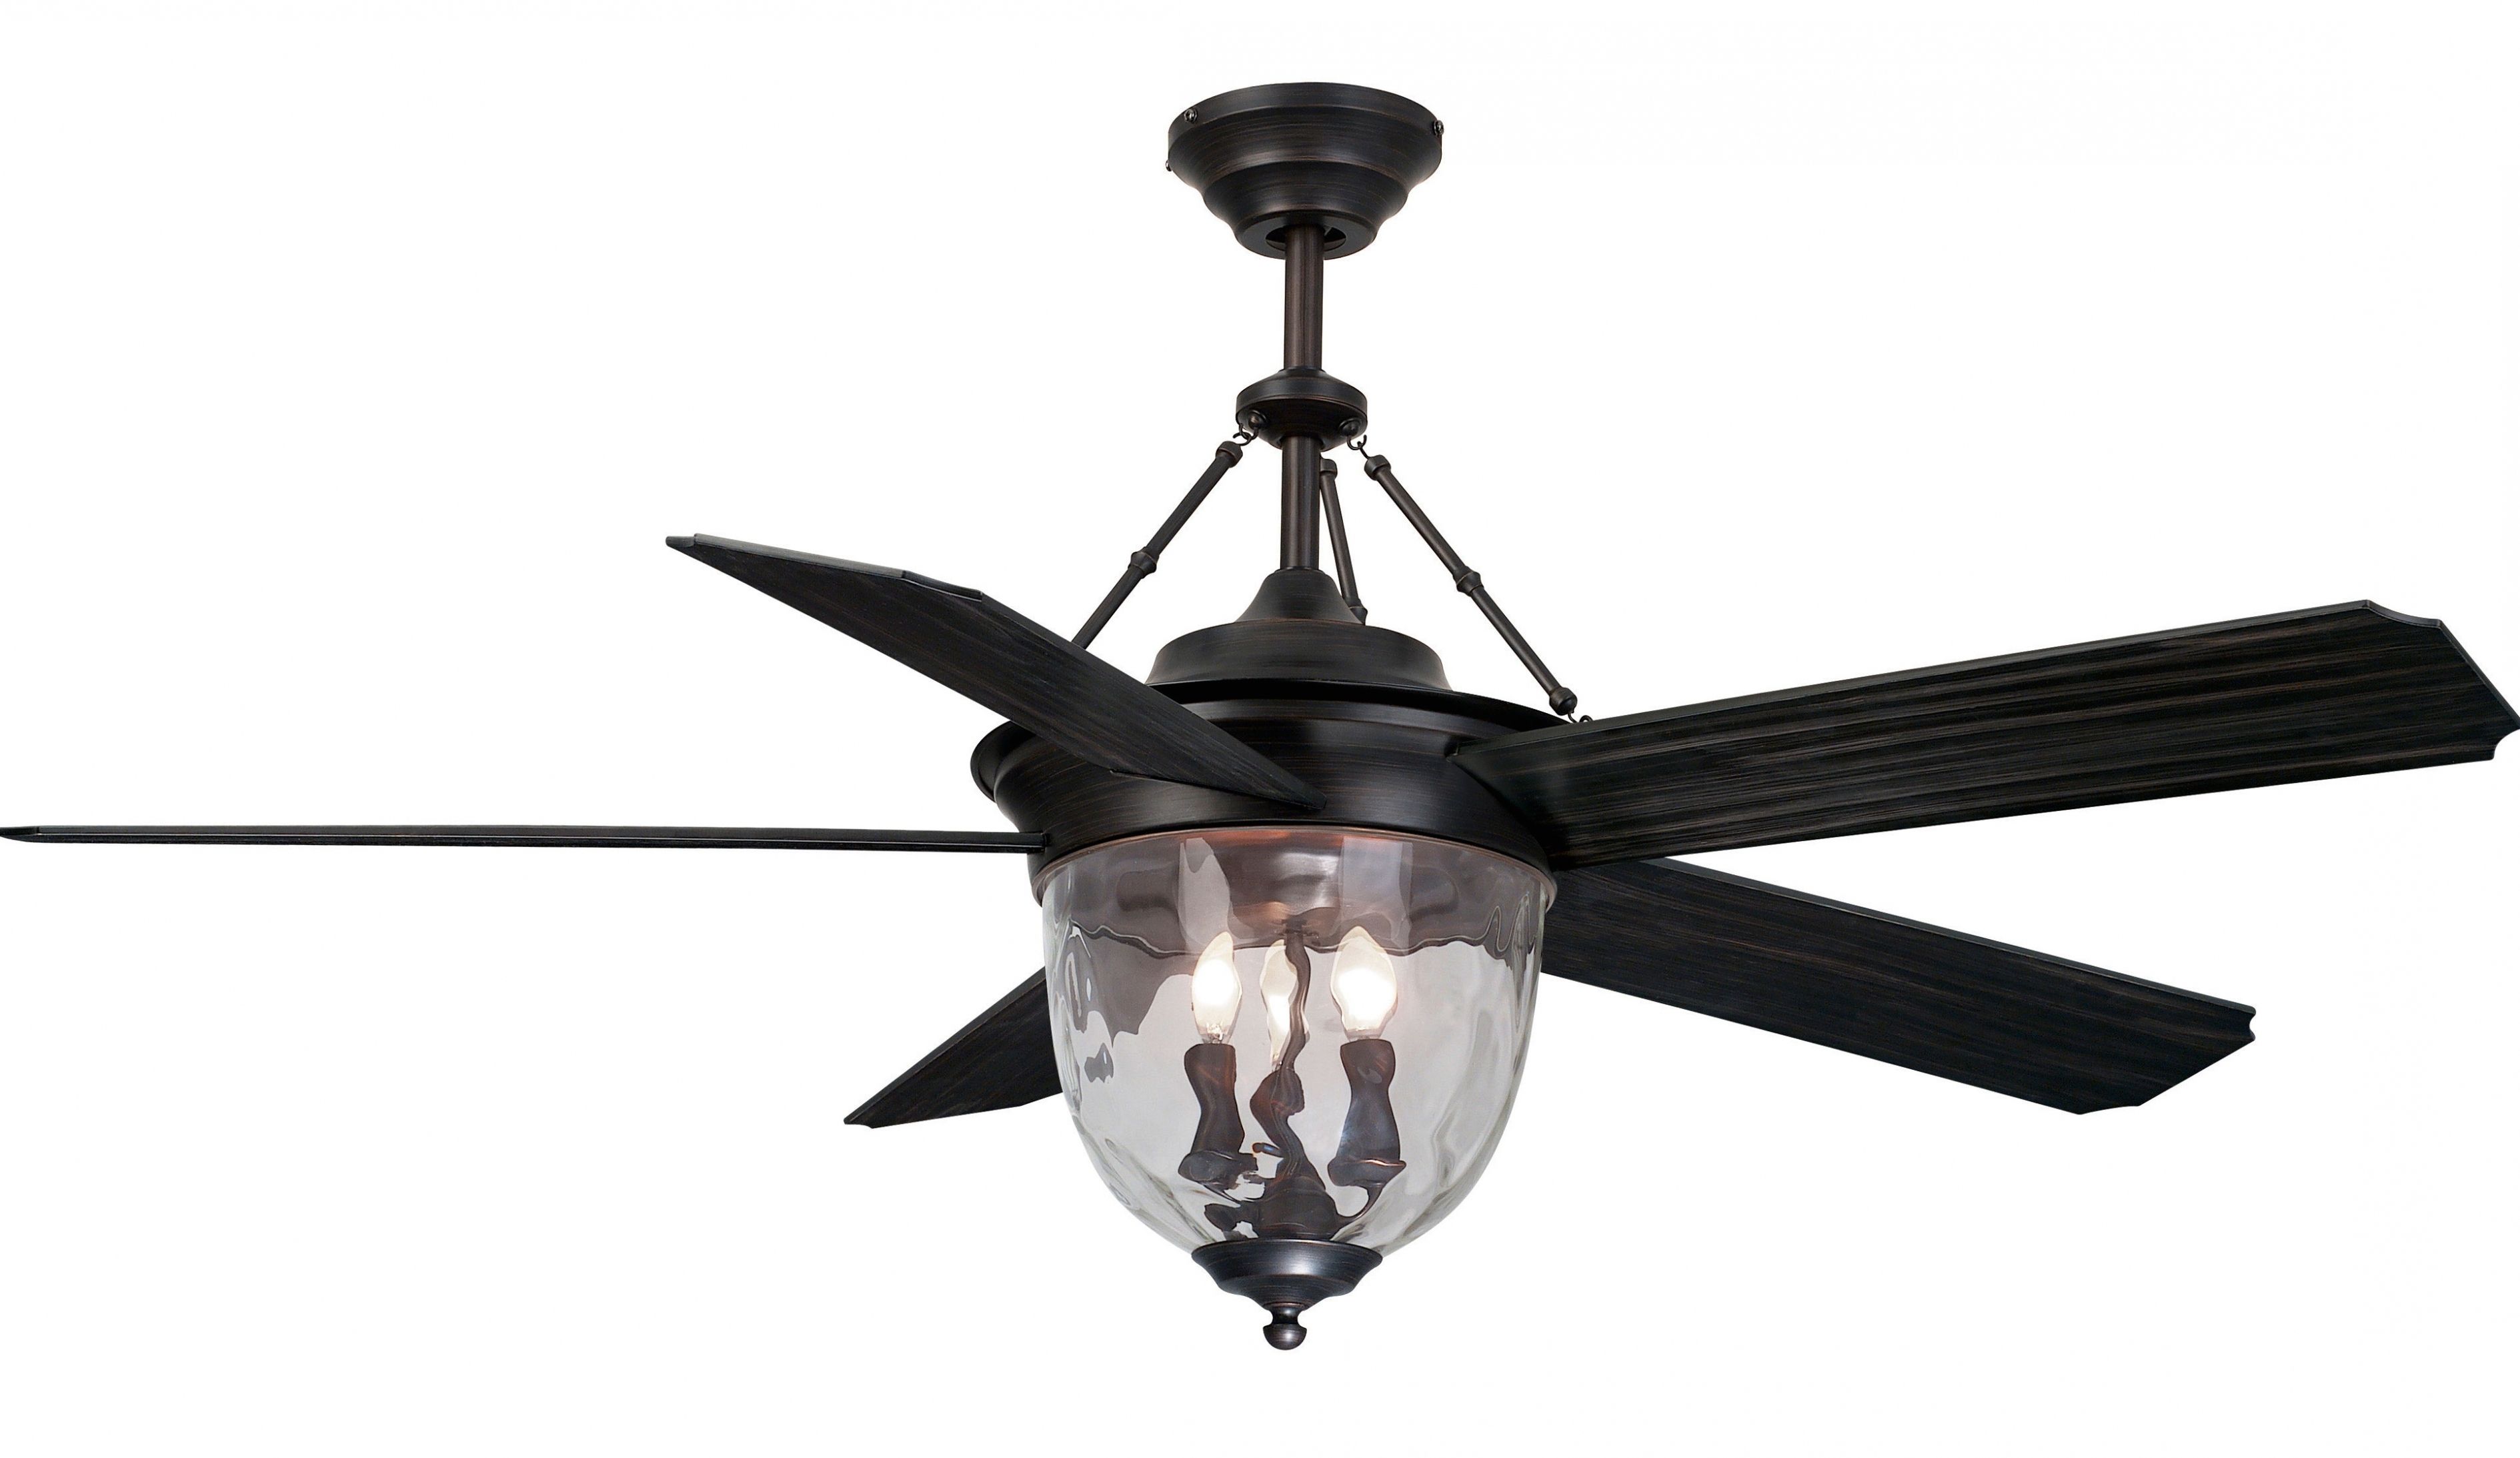 Lowes Outdoor Ceiling Fans With Lights Fabulous Bathroom Ceiling With Regard To 2018 Outdoor Ceiling Fans With Lights At Lowes (View 4 of 20)